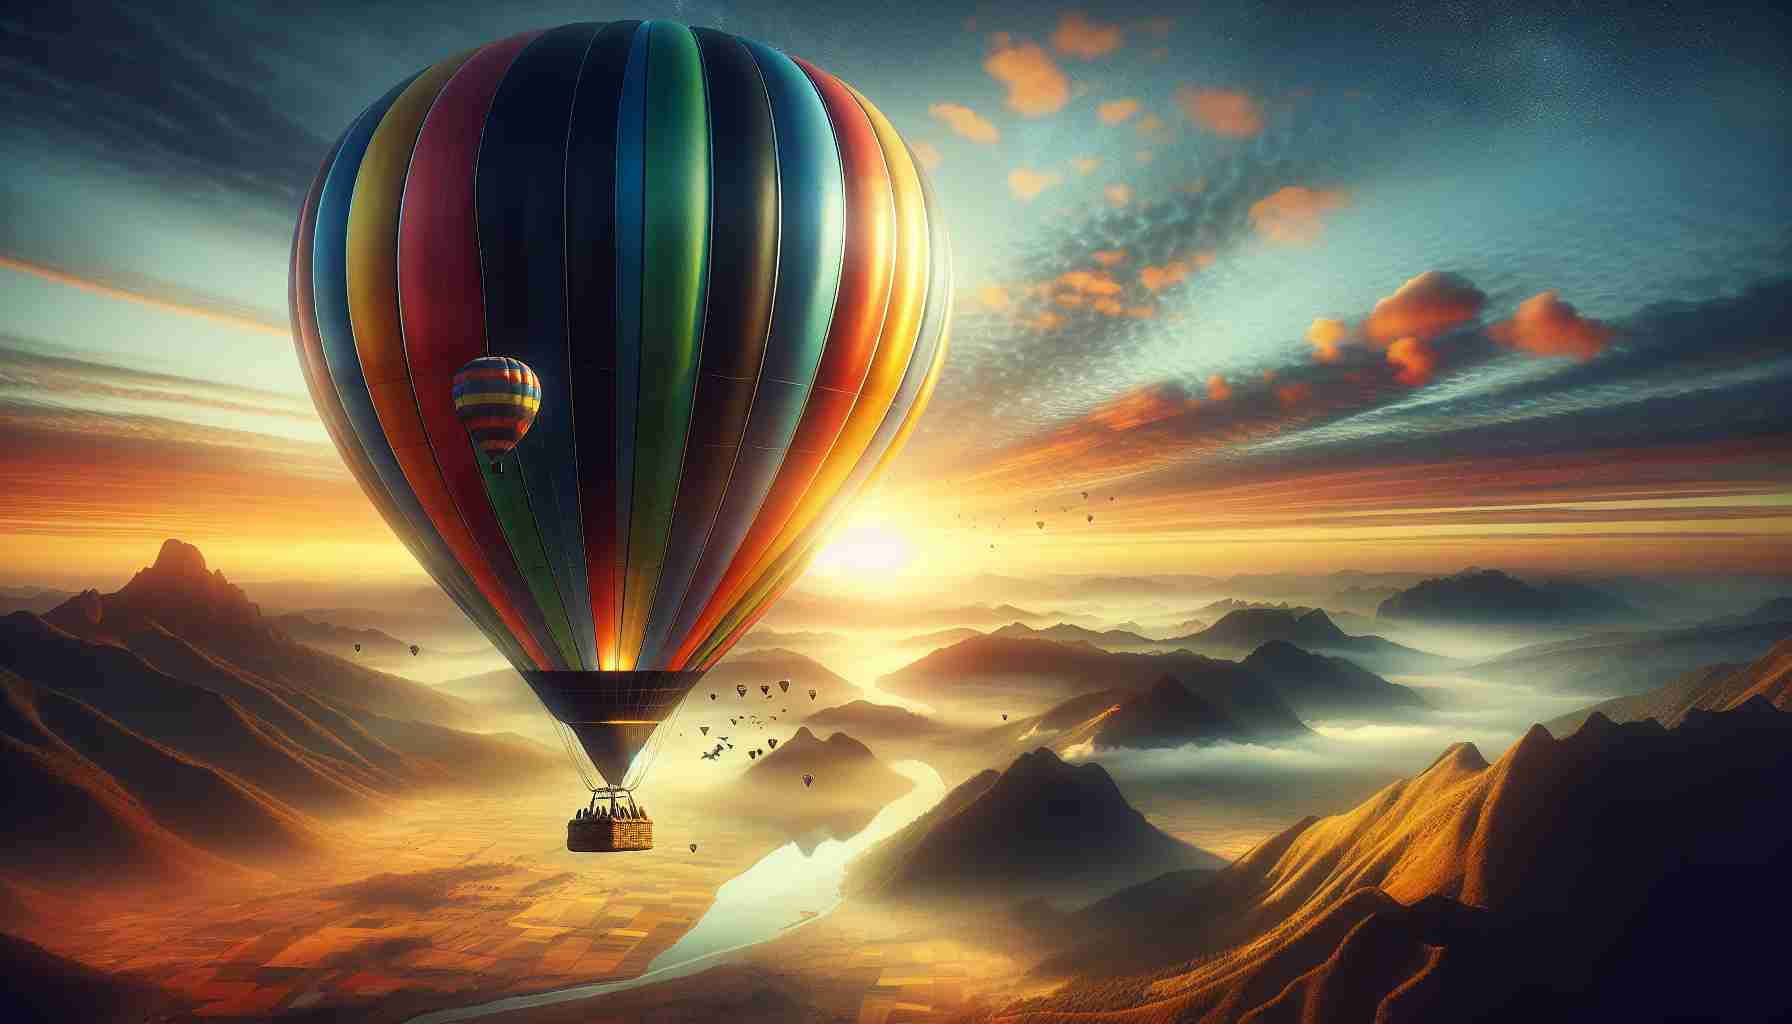 Create a striking, high-definition image that combines the romanticism of old-world travel with a futuristic perspective. In the center of the composition is a colossal, colorfully striped hot air balloon, gently floating above a breathtaking landscape that extends towards the horizon. Tiny figures of adventurous tourists are visible in the balloon's basket, suggesting the idea of intrepid exploration. In the backdrop, a morning sun is slowly rising, casting warm hues onto the scene and creating an effect of overwhelming beauty. The overall picture embodies the concept of 'New Heights in Tourism: Balloon Adventures as the Future of Travel'.